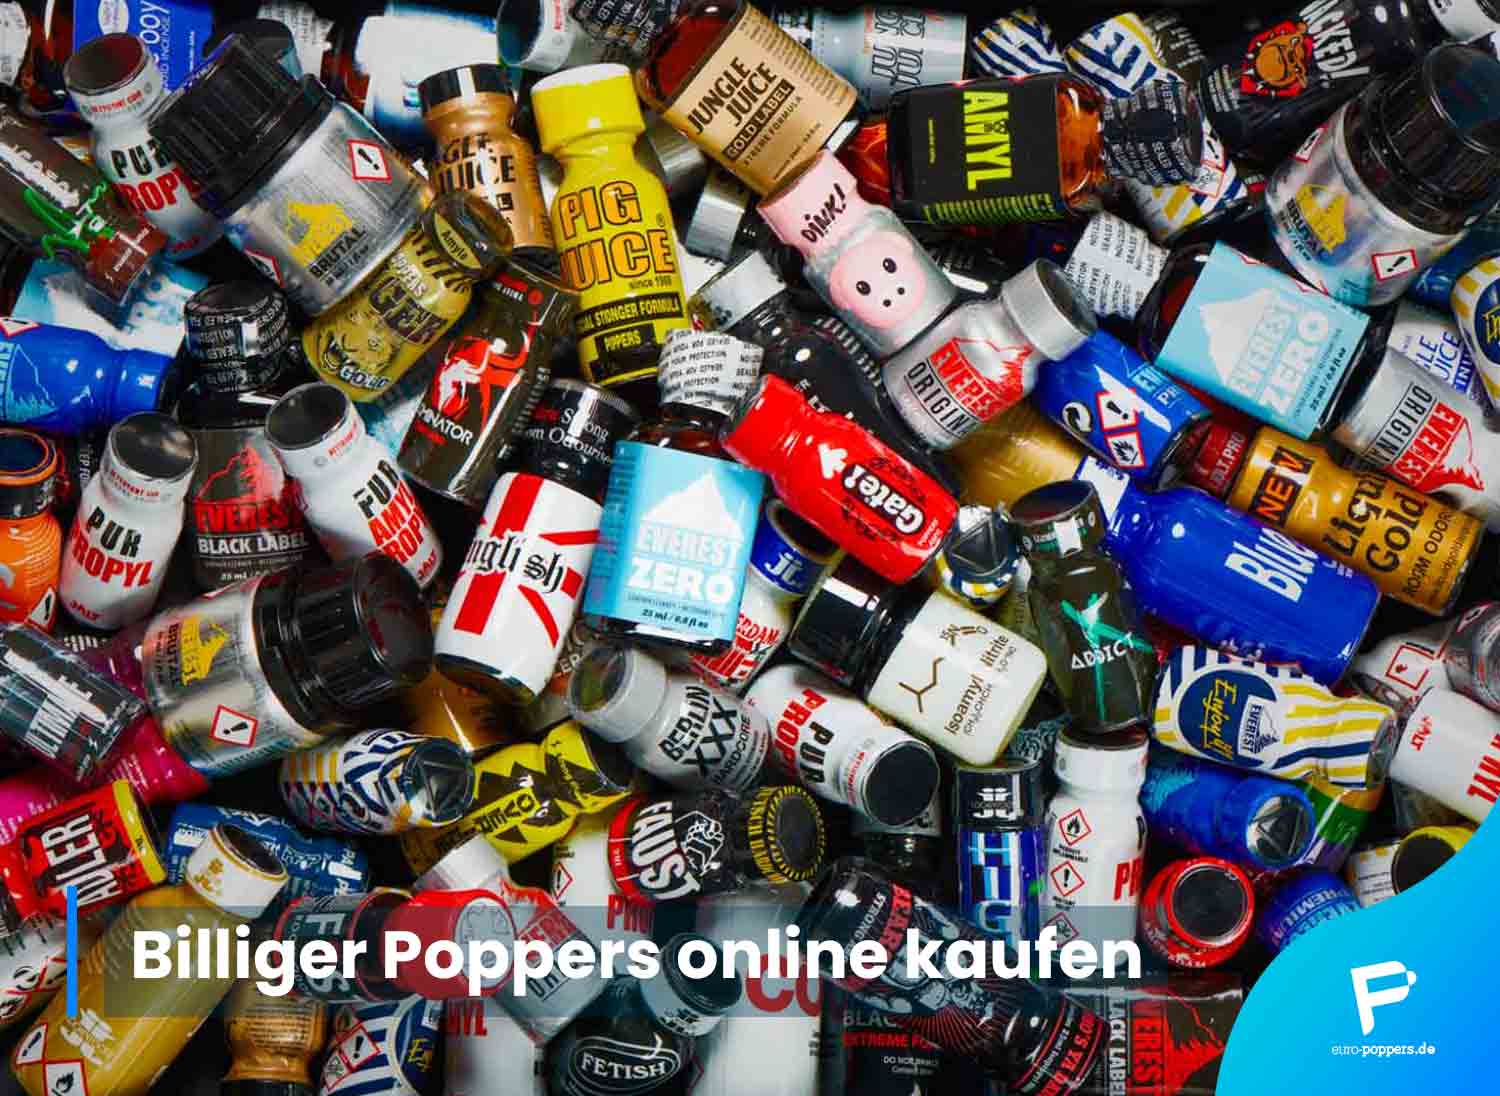 You are currently viewing Billiger Poppers online kaufen